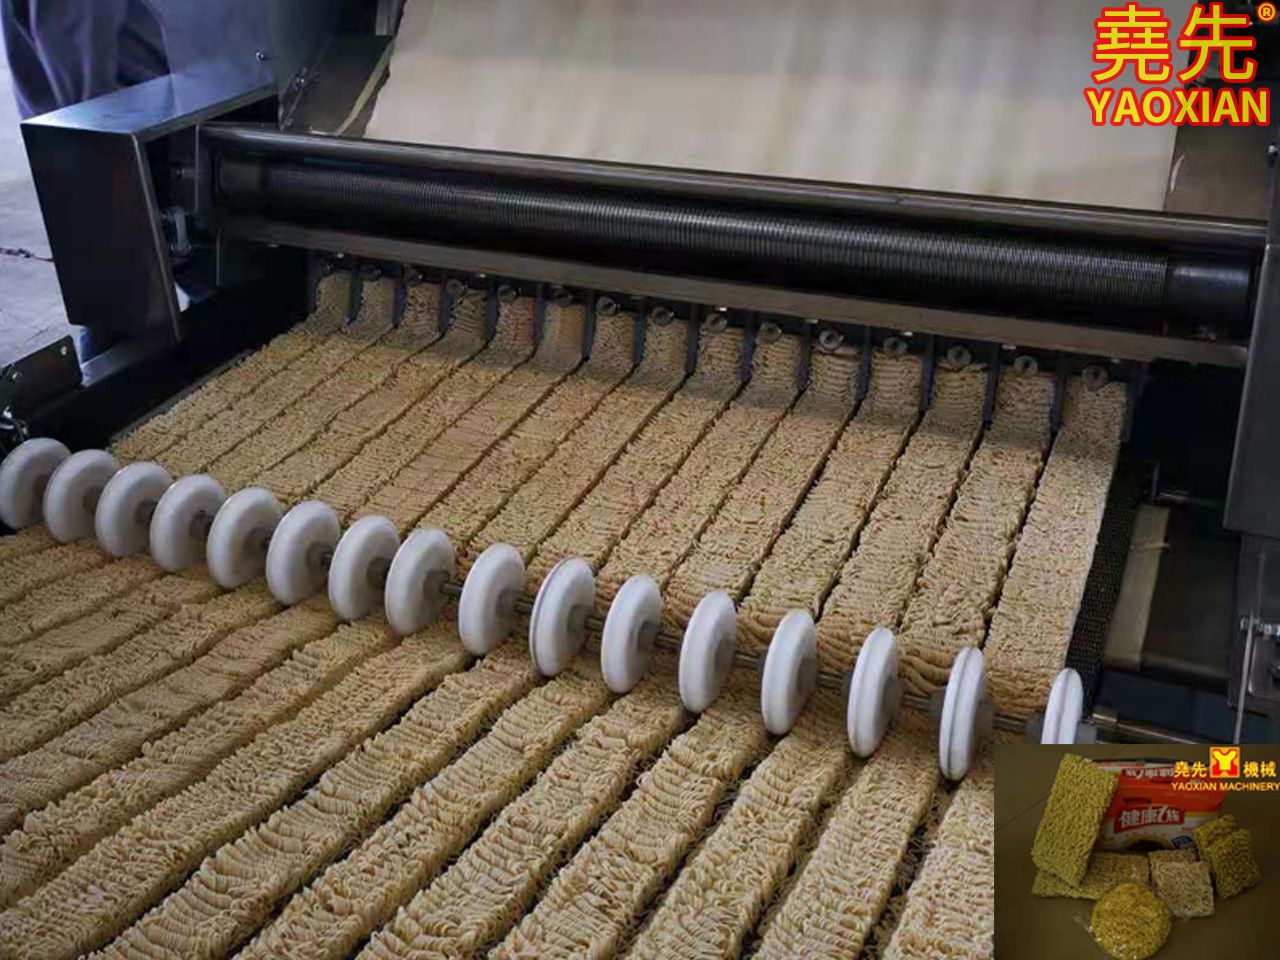 What are the ingredients of the automatic rice noodle production line?